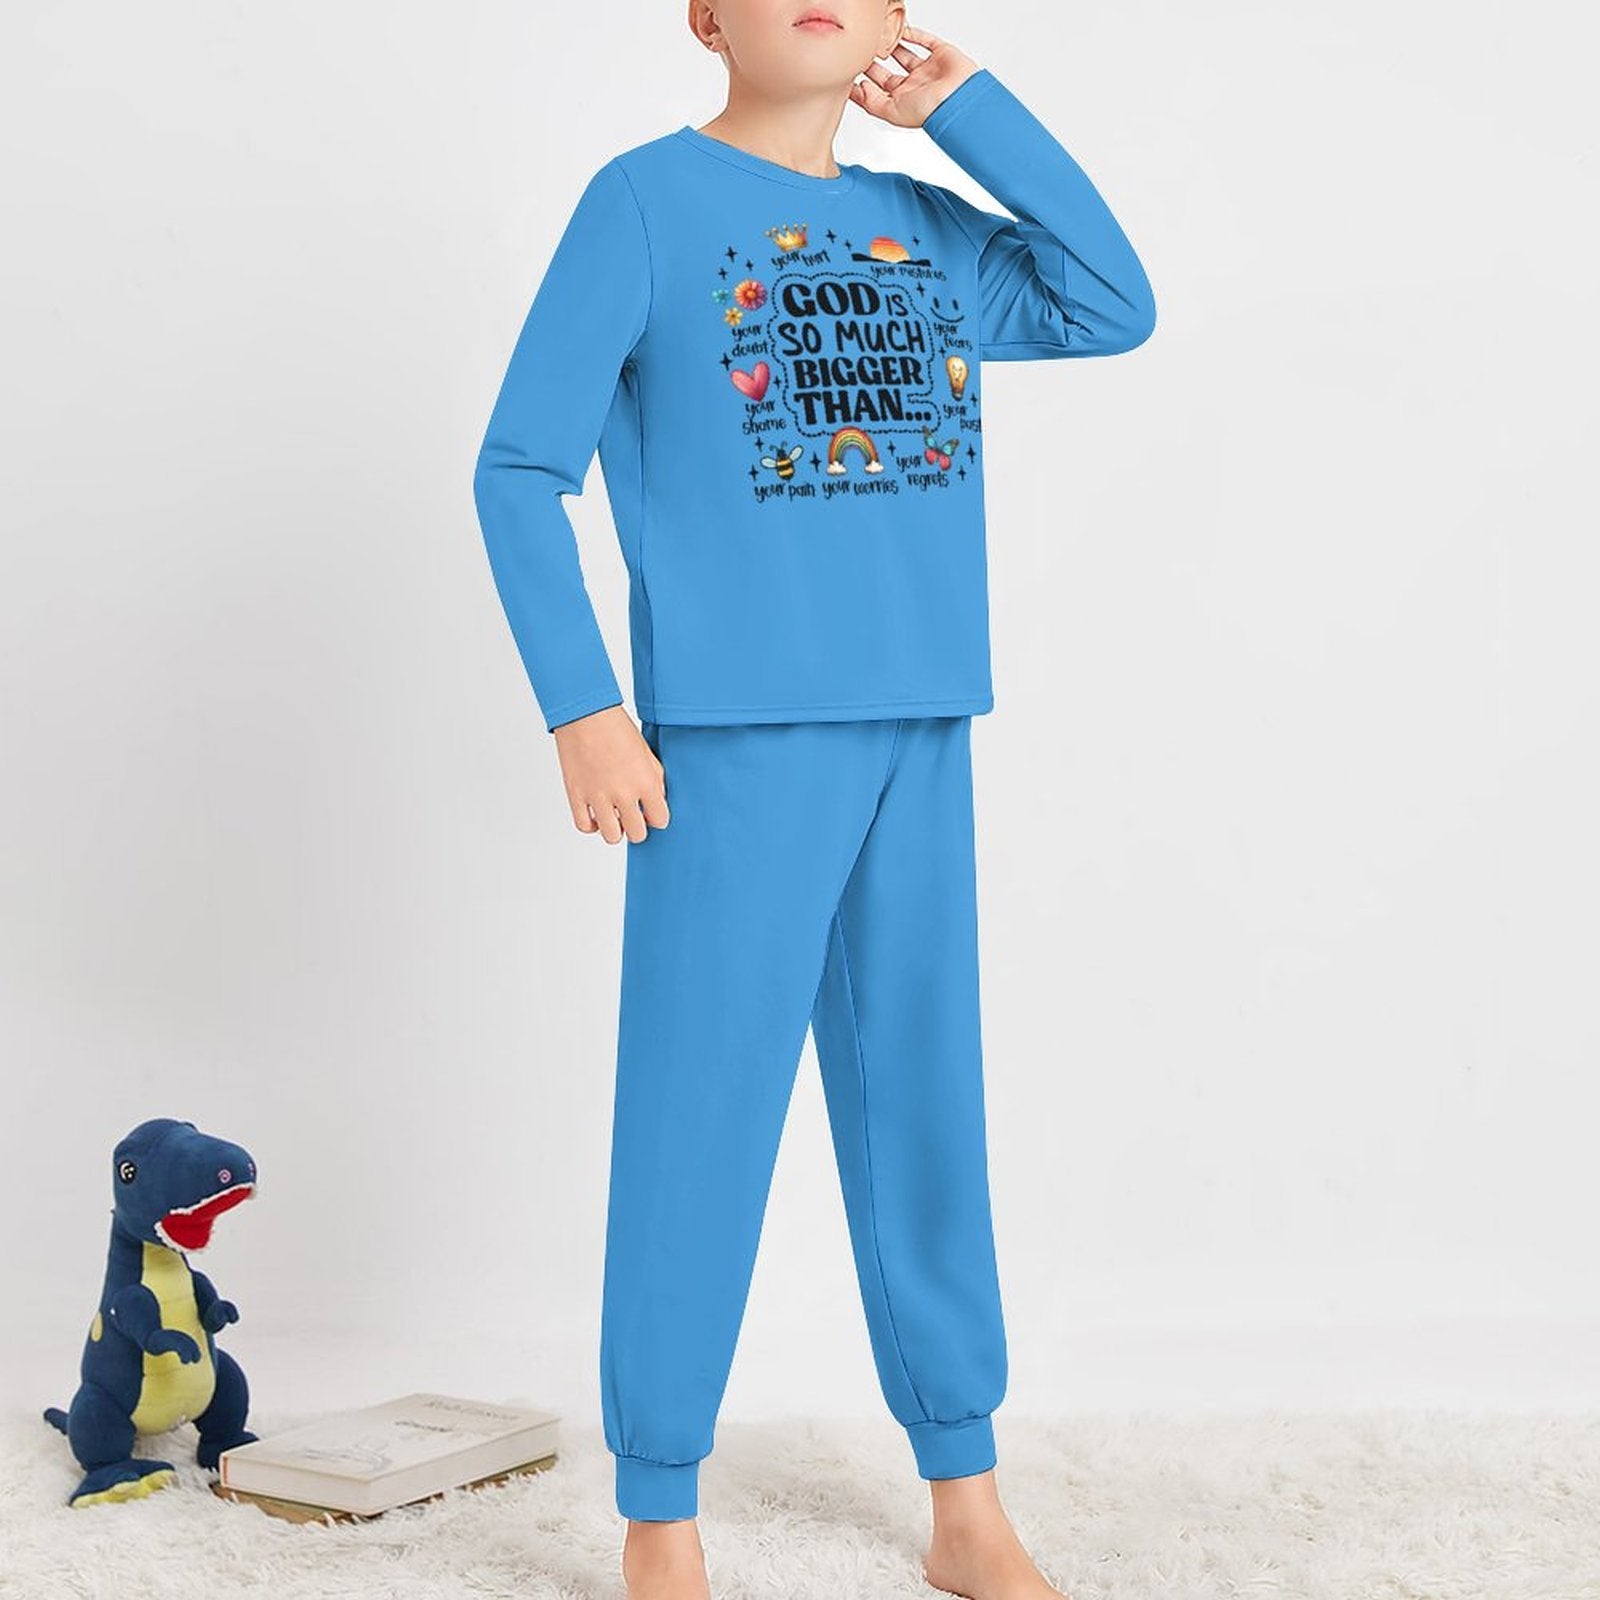 God Is So Much Bigger Than Youth Toddler Christian Long Sleeve Boys Pajama Set SALE-Personal Design